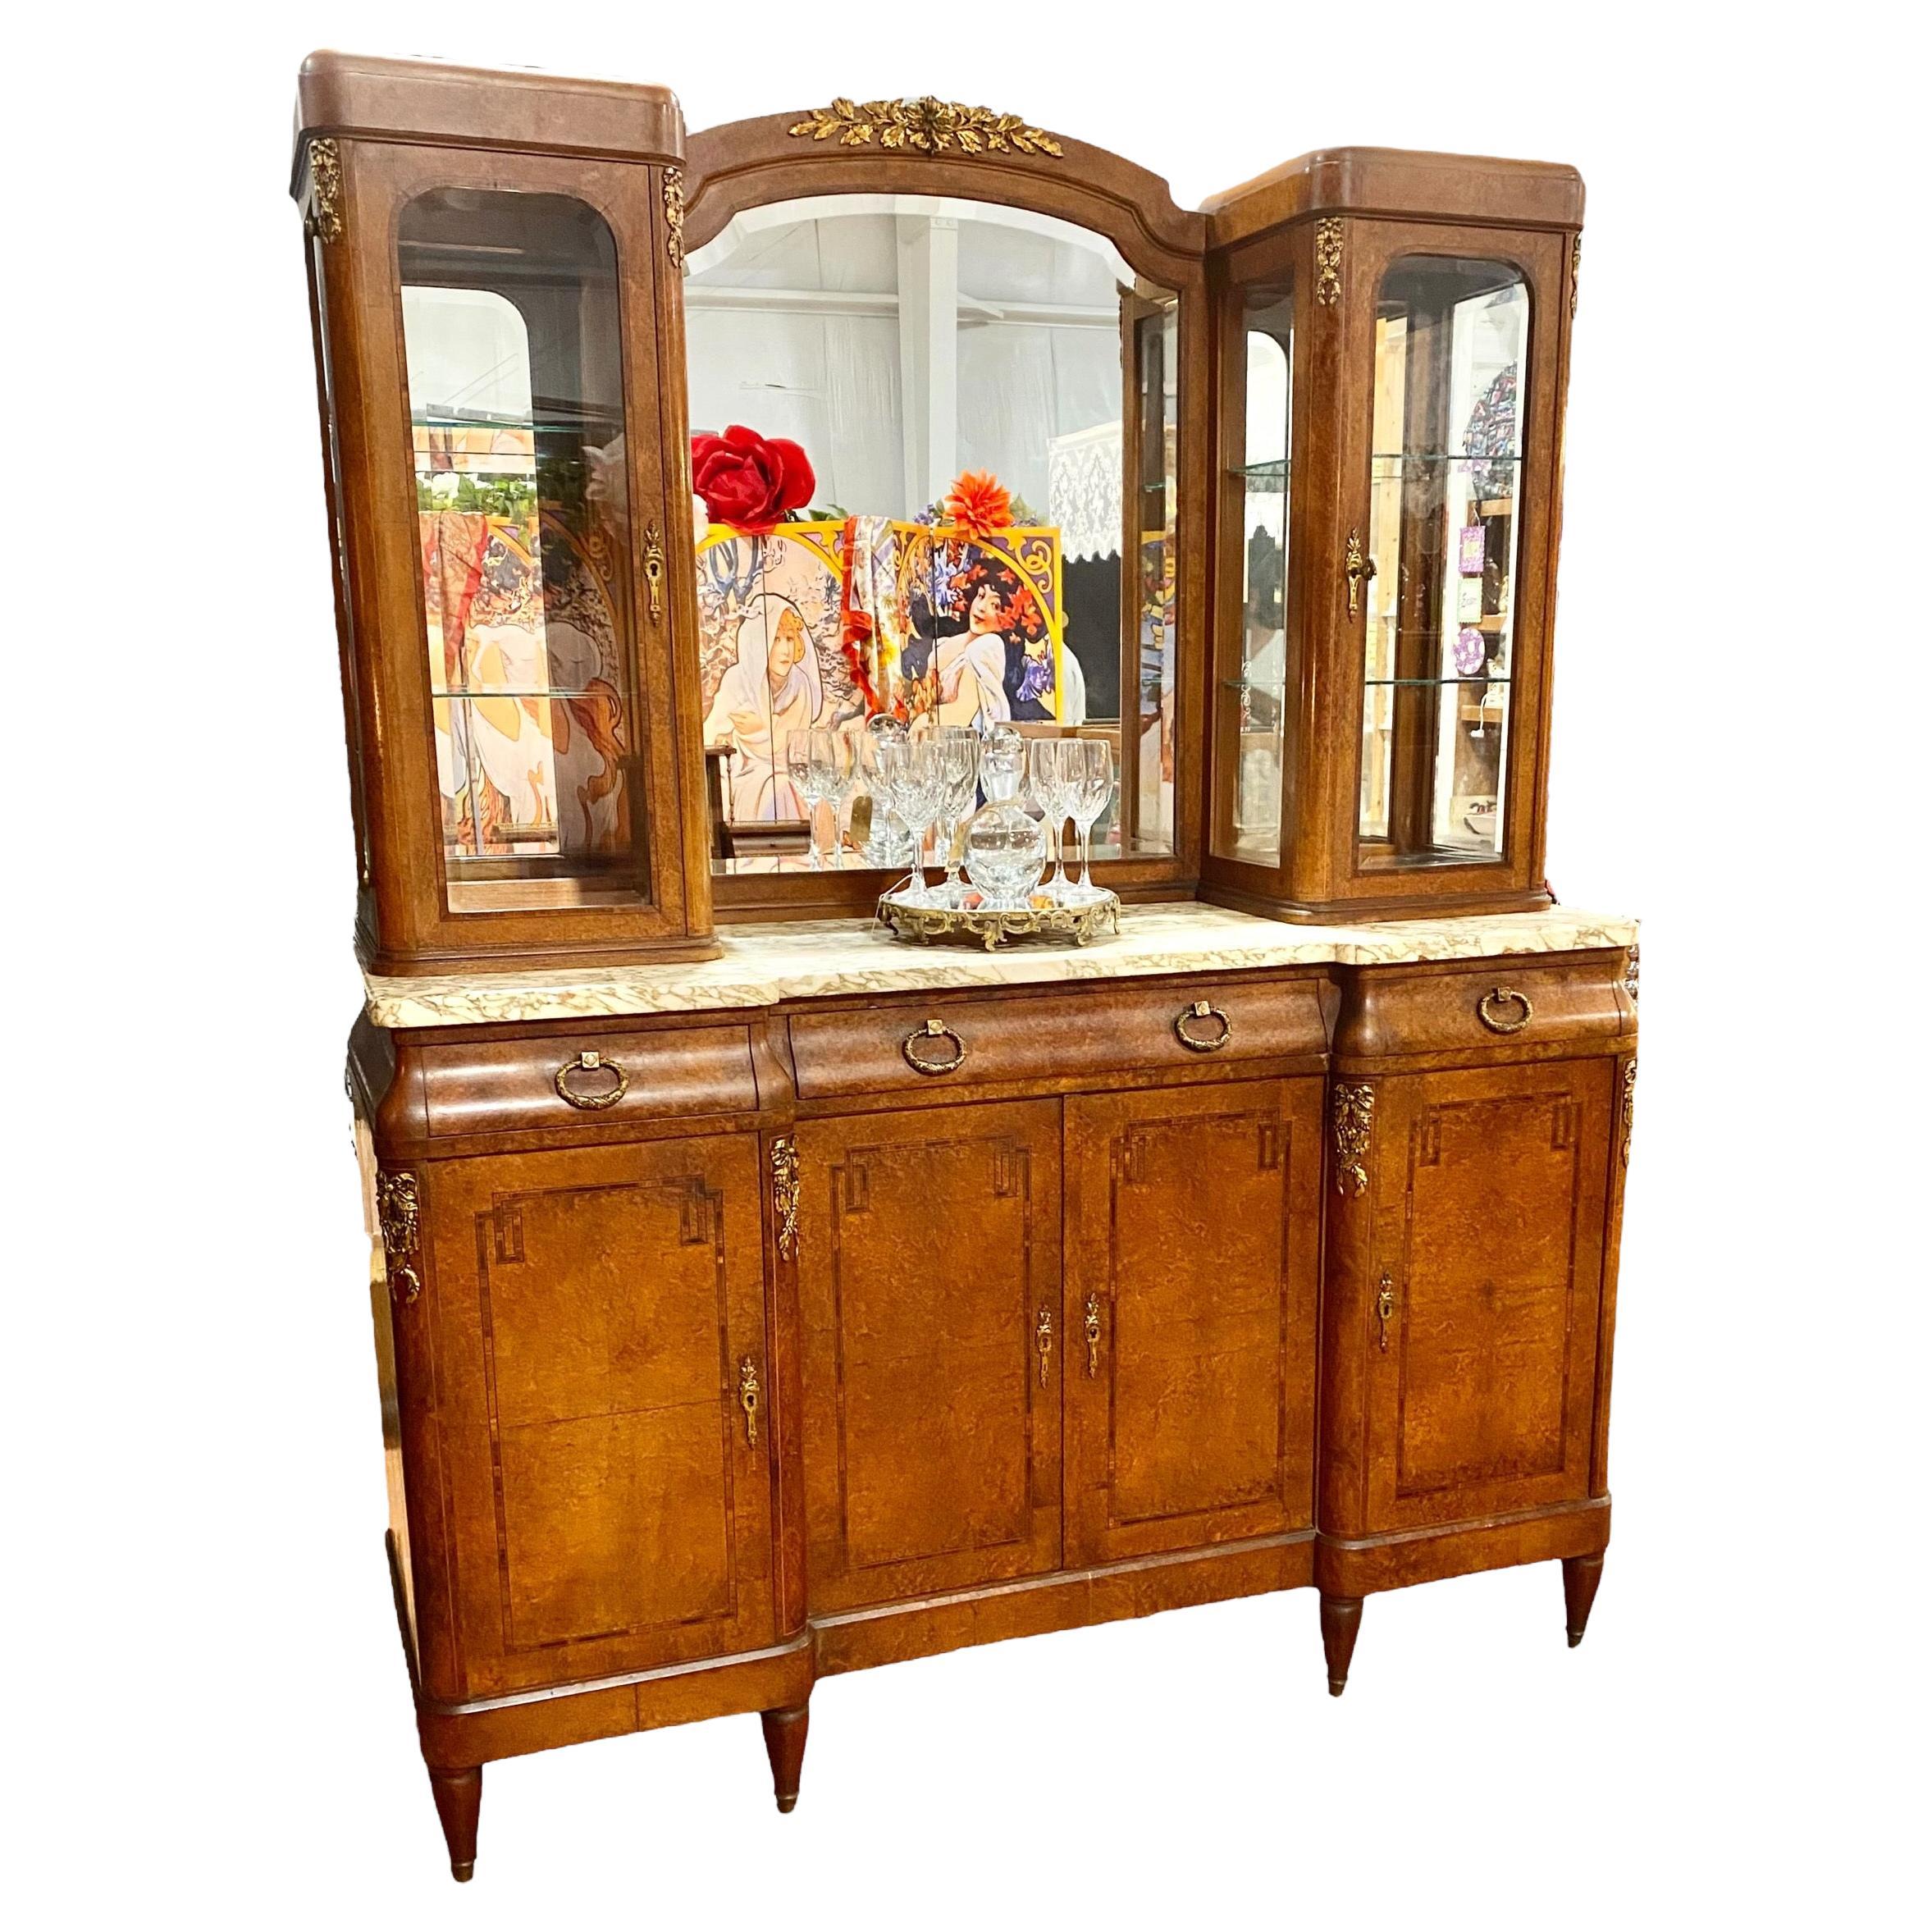 Antique French Beaux Arts Inlaid Bird’S-Eye Maple and Marble Sideboard/Bar